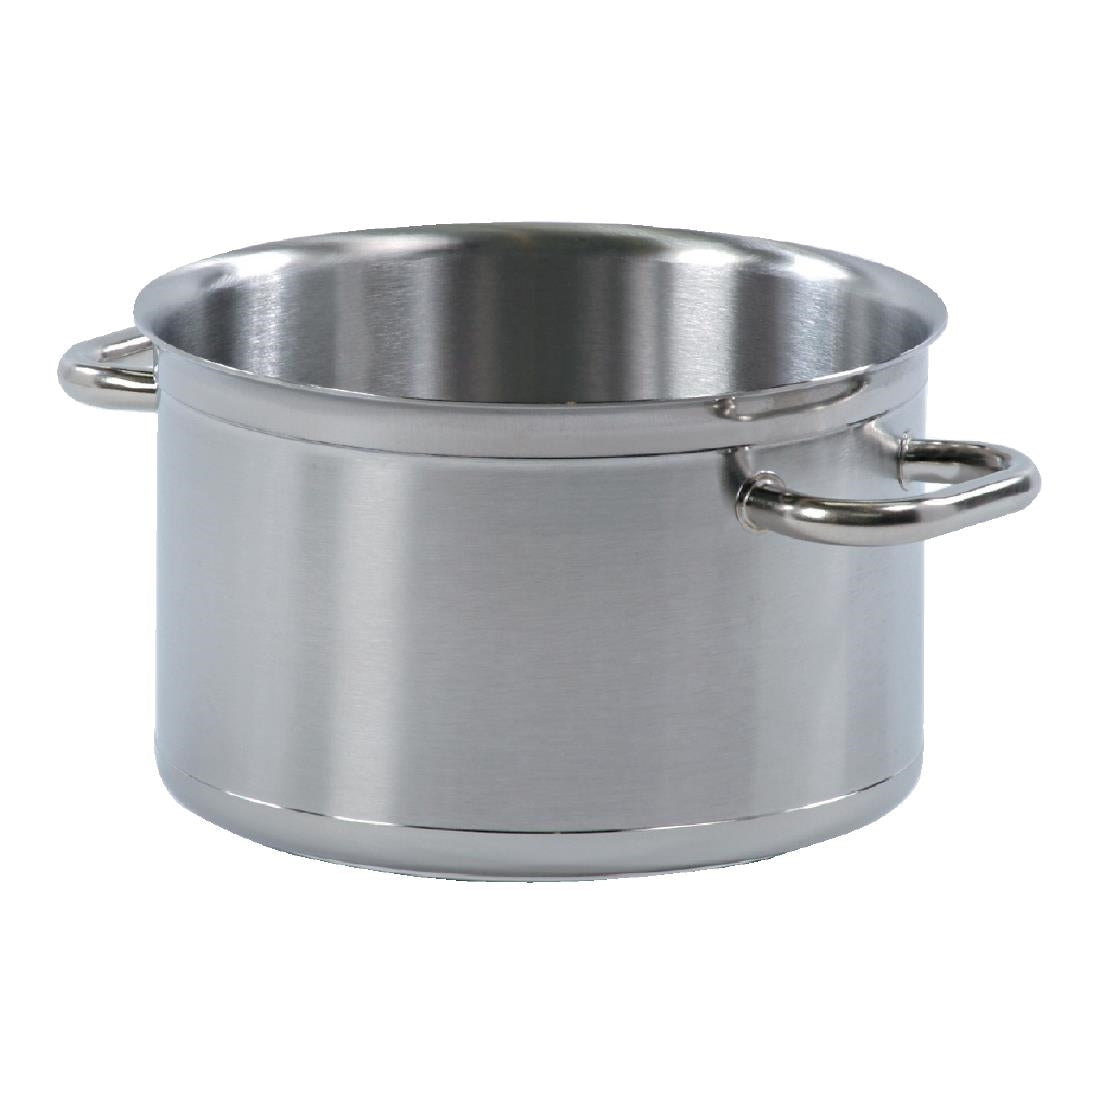 Bourgeat Tradition Plus Boiling Pan 7Ltr JD Catering Equipment Solutions Ltd